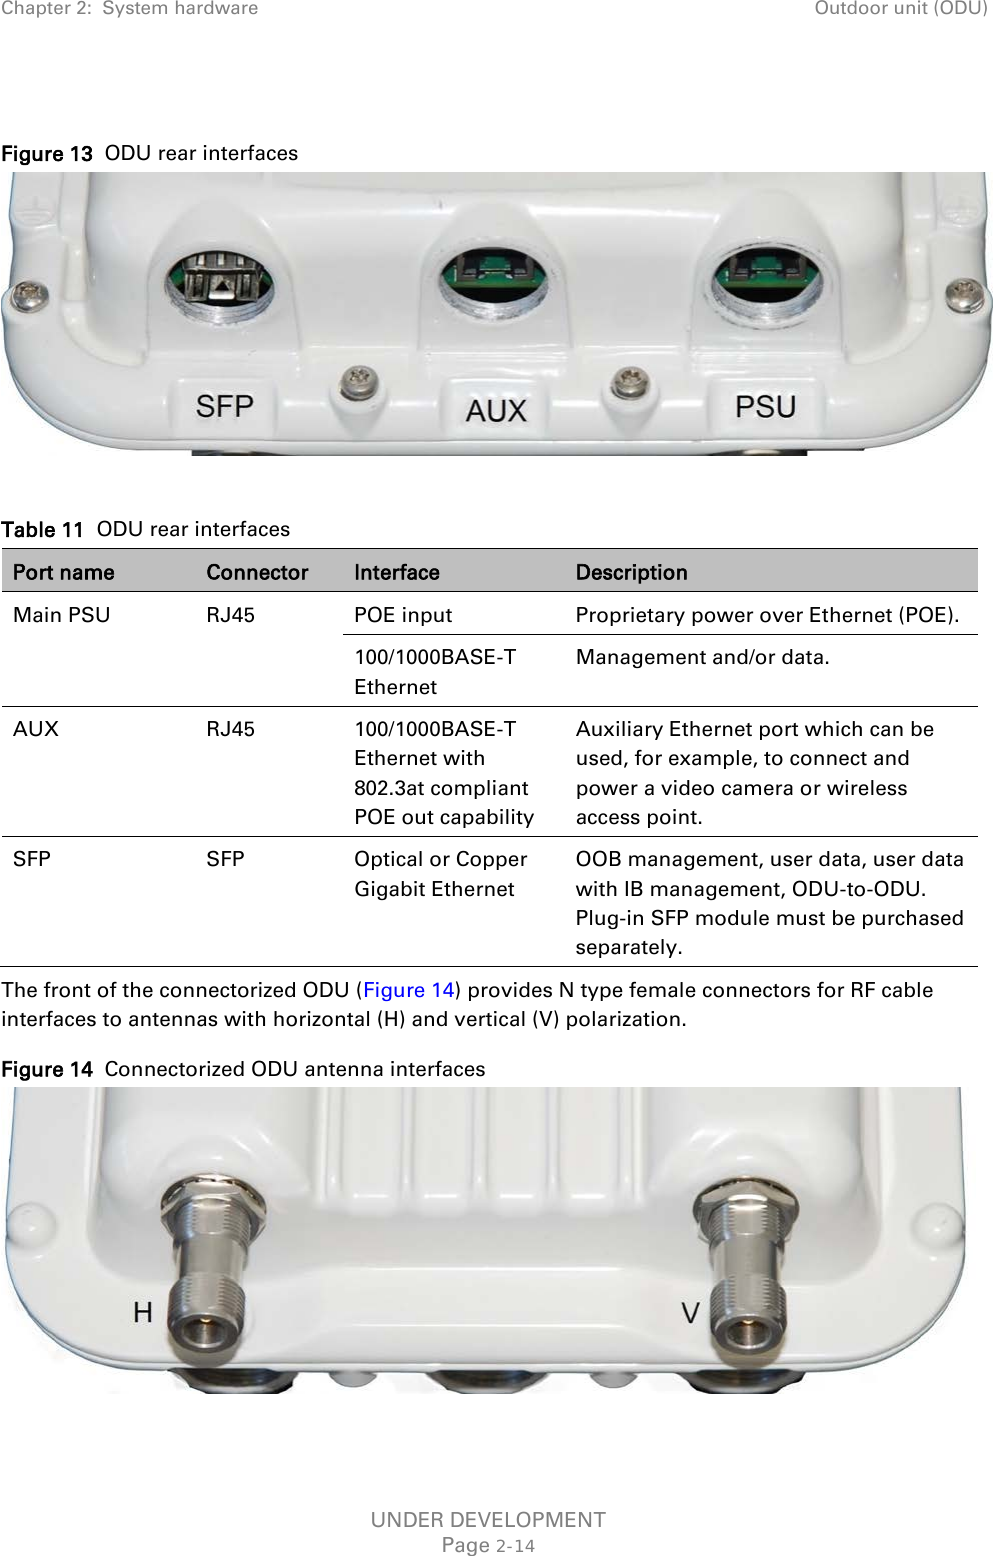 Chapter 2:  System hardware Outdoor unit (ODU)   Figure 13  ODU rear interfaces   Table 11  ODU rear interfaces Port name Connector Interface Description Main PSU   RJ45 POE input Proprietary power over Ethernet (POE). 100/1000BASE-T Ethernet Management and/or data. AUX RJ45 100/1000BASE-T Ethernet with 802.3at compliant POE out capability Auxiliary Ethernet port which can be used, for example, to connect and power a video camera or wireless access point. SFP SFP Optical or Copper Gigabit Ethernet  OOB management, user data, user data with IB management, ODU-to-ODU. Plug-in SFP module must be purchased separately. The front of the connectorized ODU (Figure 14) provides N type female connectors for RF cable interfaces to antennas with horizontal (H) and vertical (V) polarization. Figure 14  Connectorized ODU antenna interfaces    UNDER DEVELOPMENT Page 2-14 